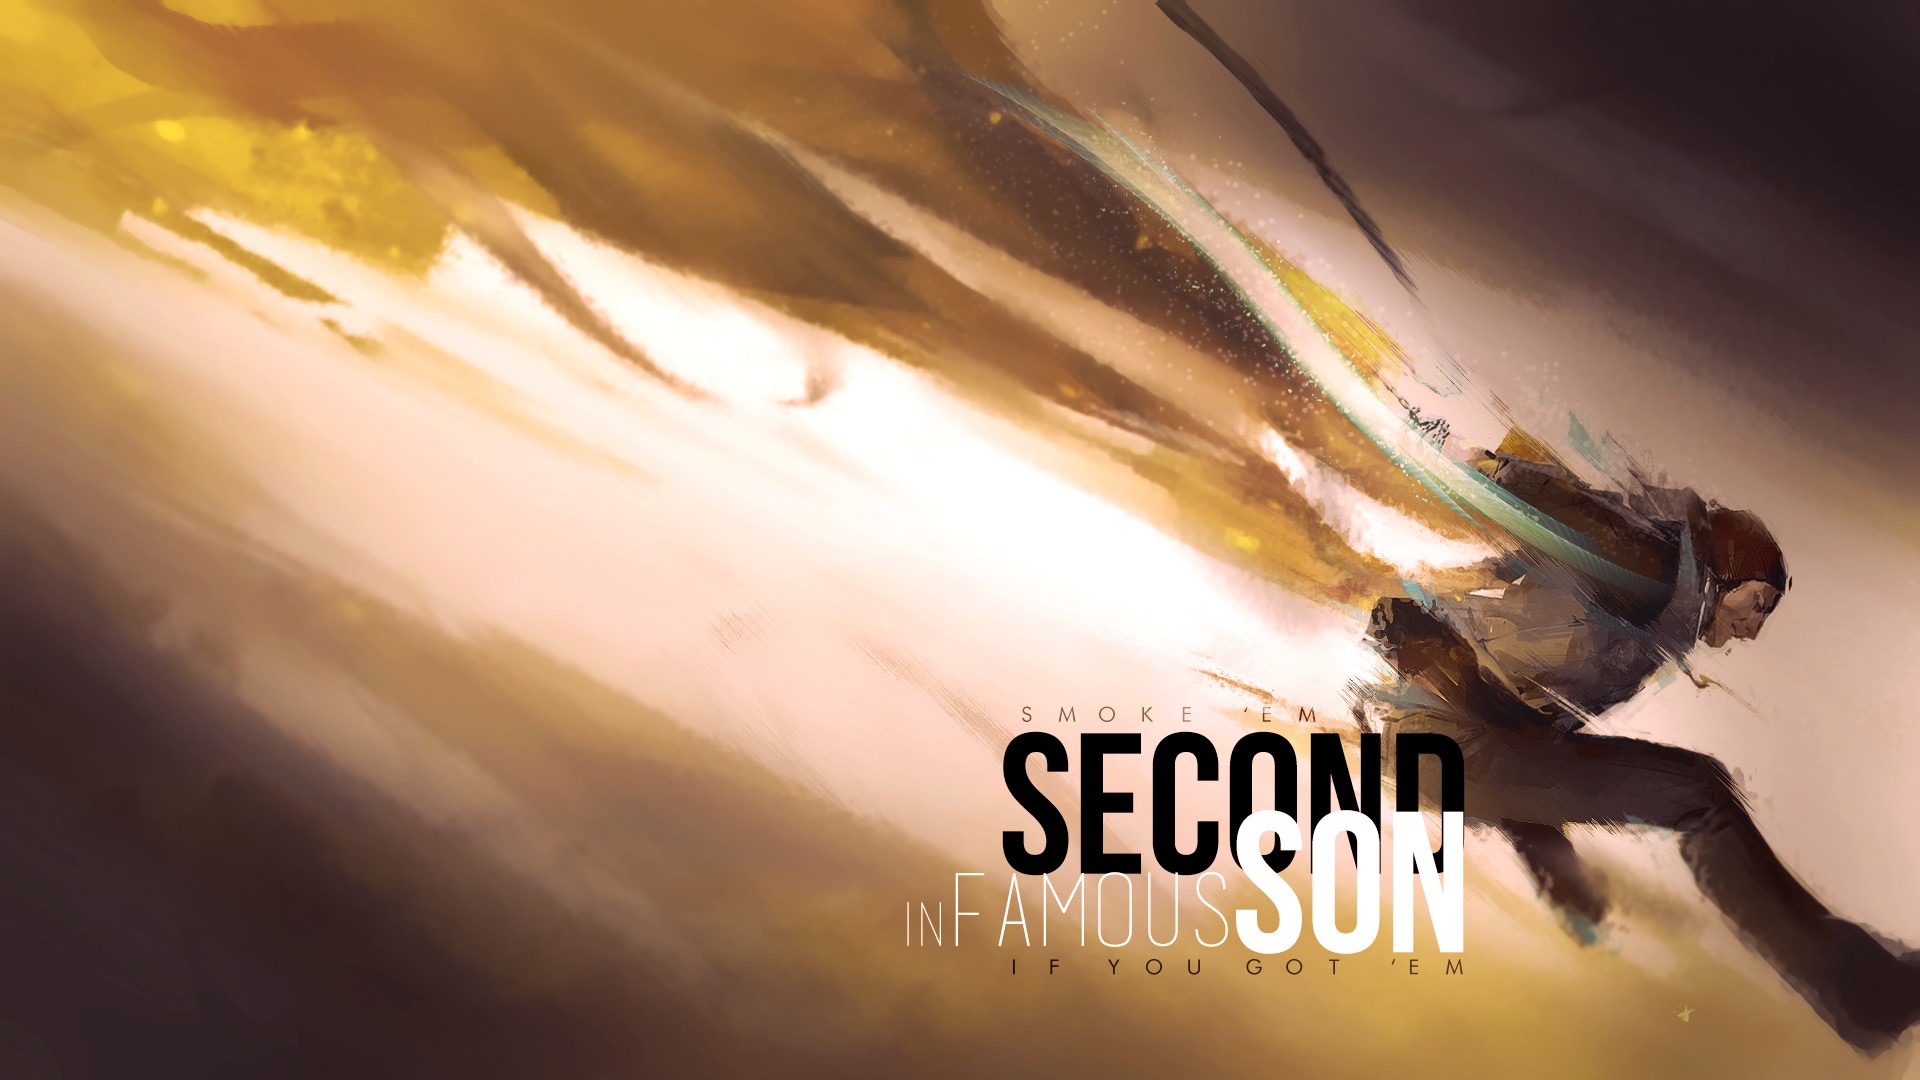 Second Son, Delsin Rowe, Playstation, Playstation 4 - Infamous Second Son , HD Wallpaper & Backgrounds